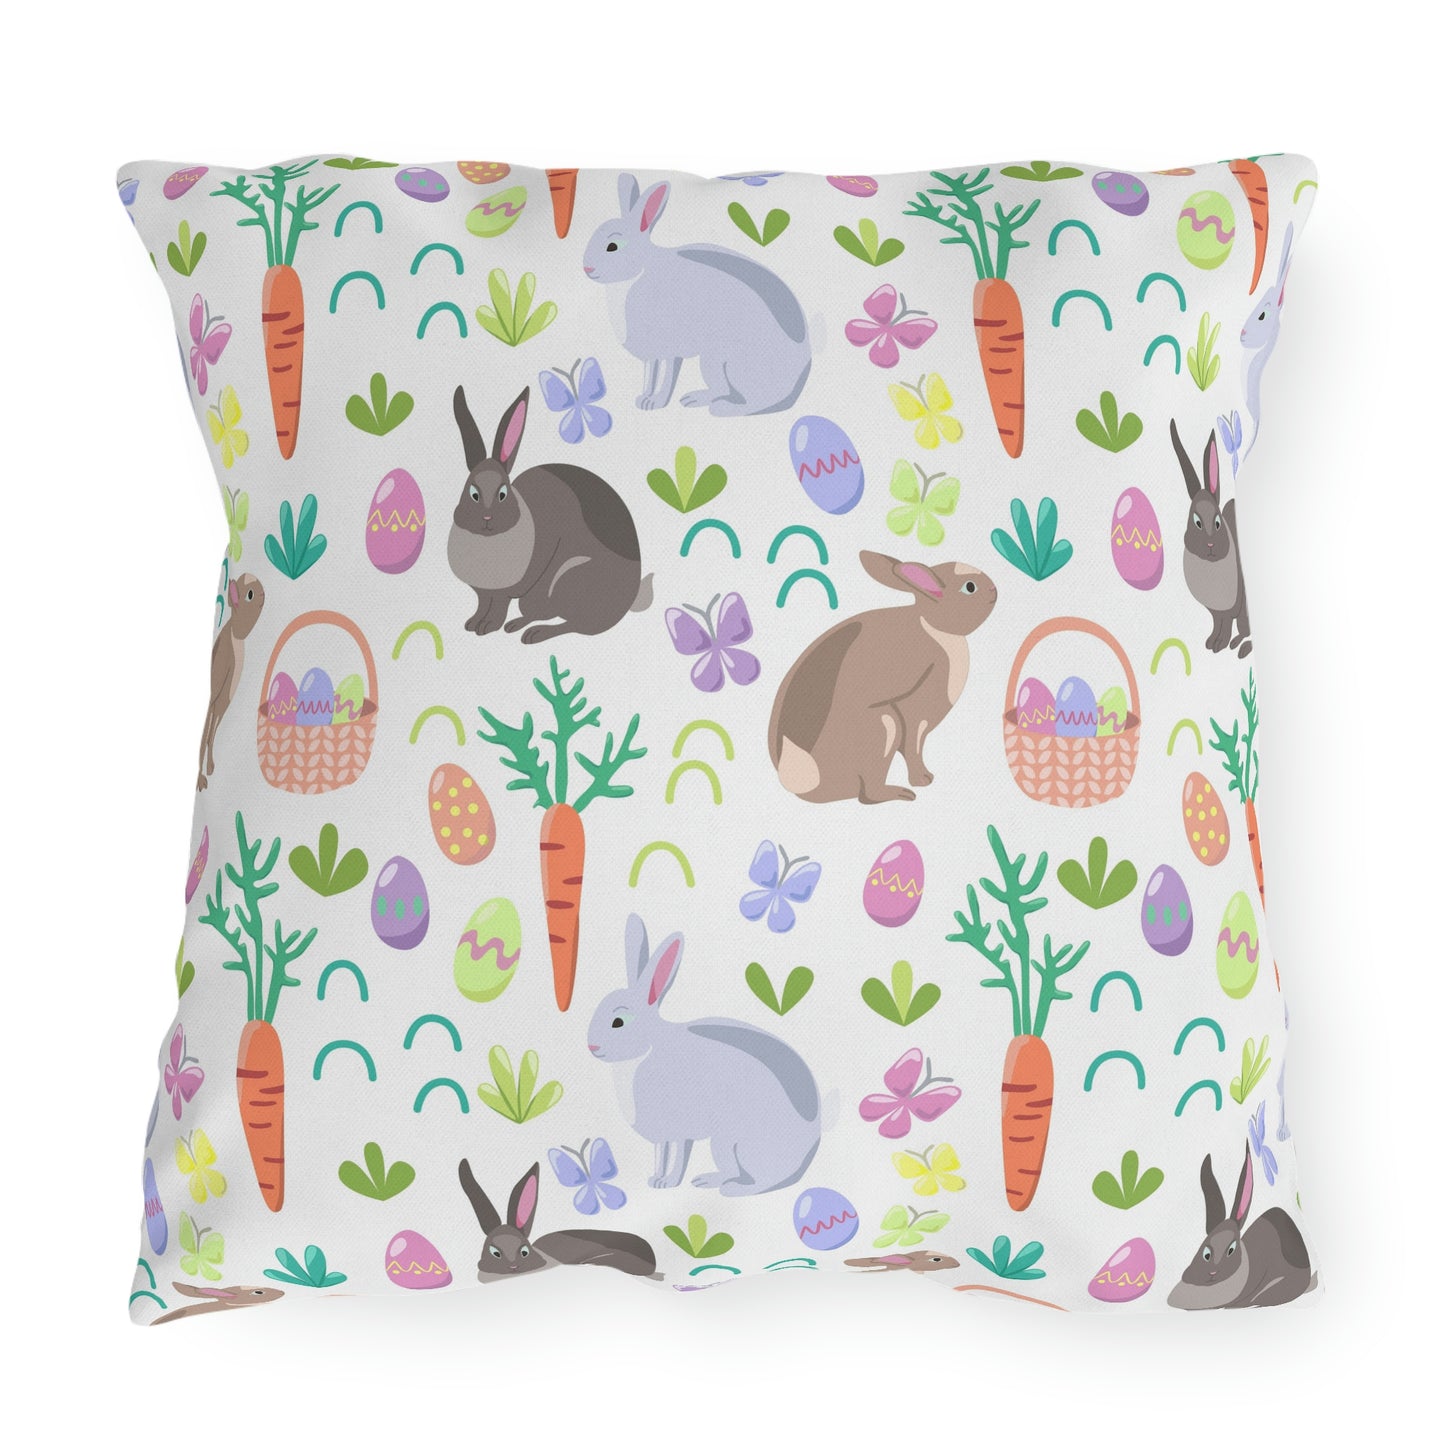 Easter Baskets, Carrots and Rabbits Outdoor Pillow